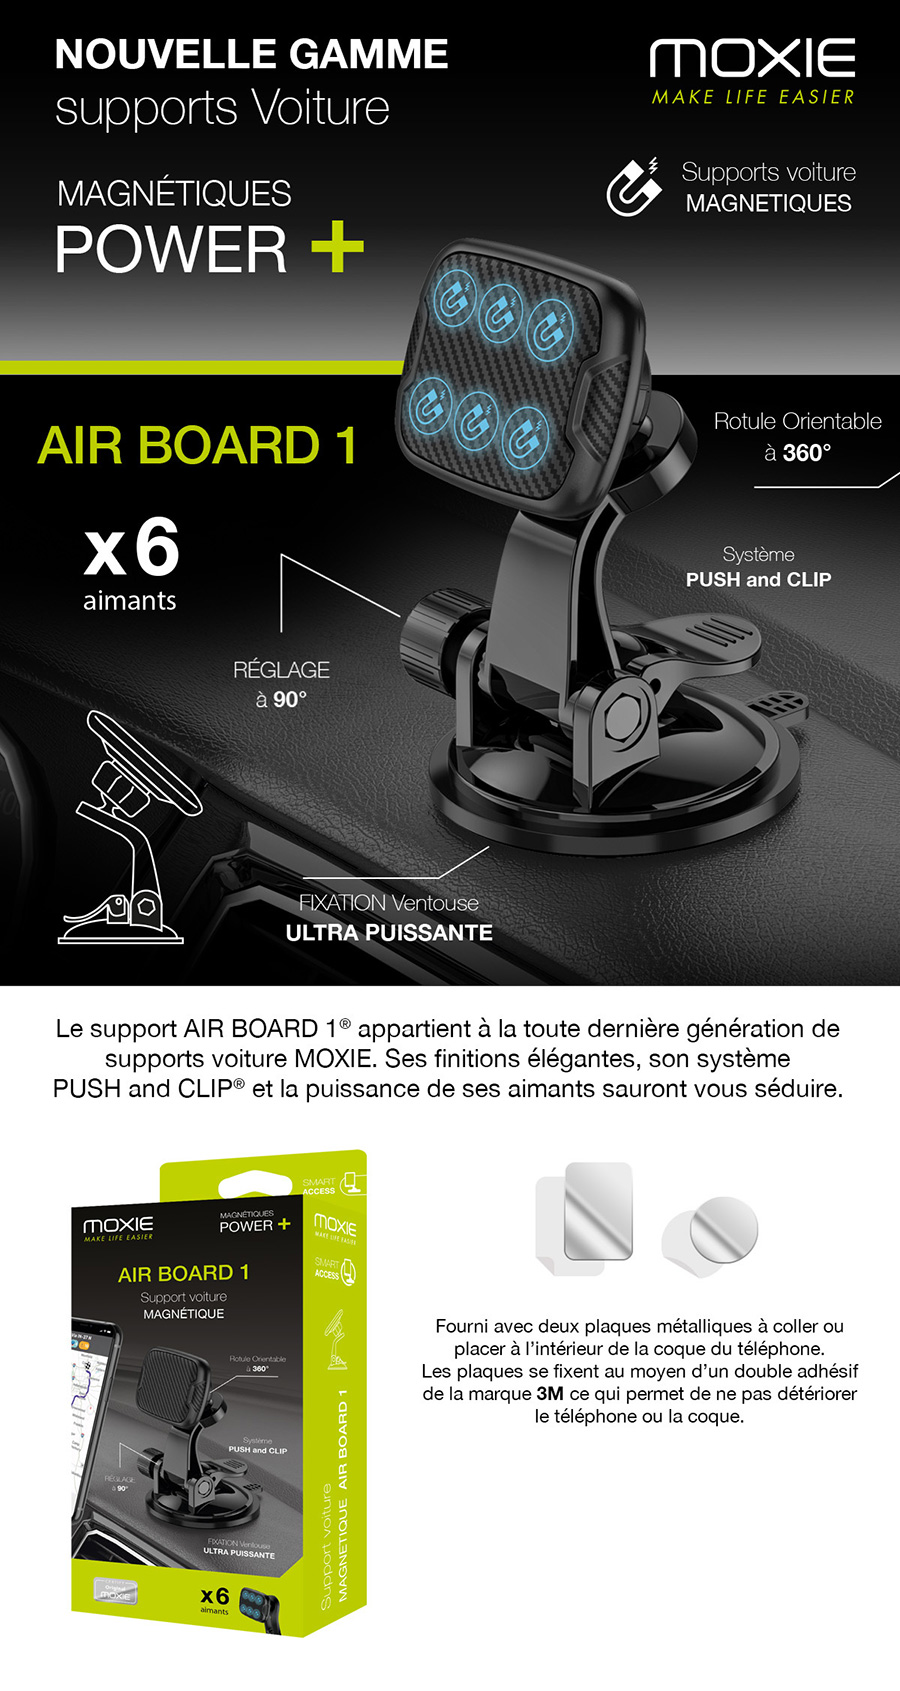 Support Voiture Magnétique FAIRPLAY